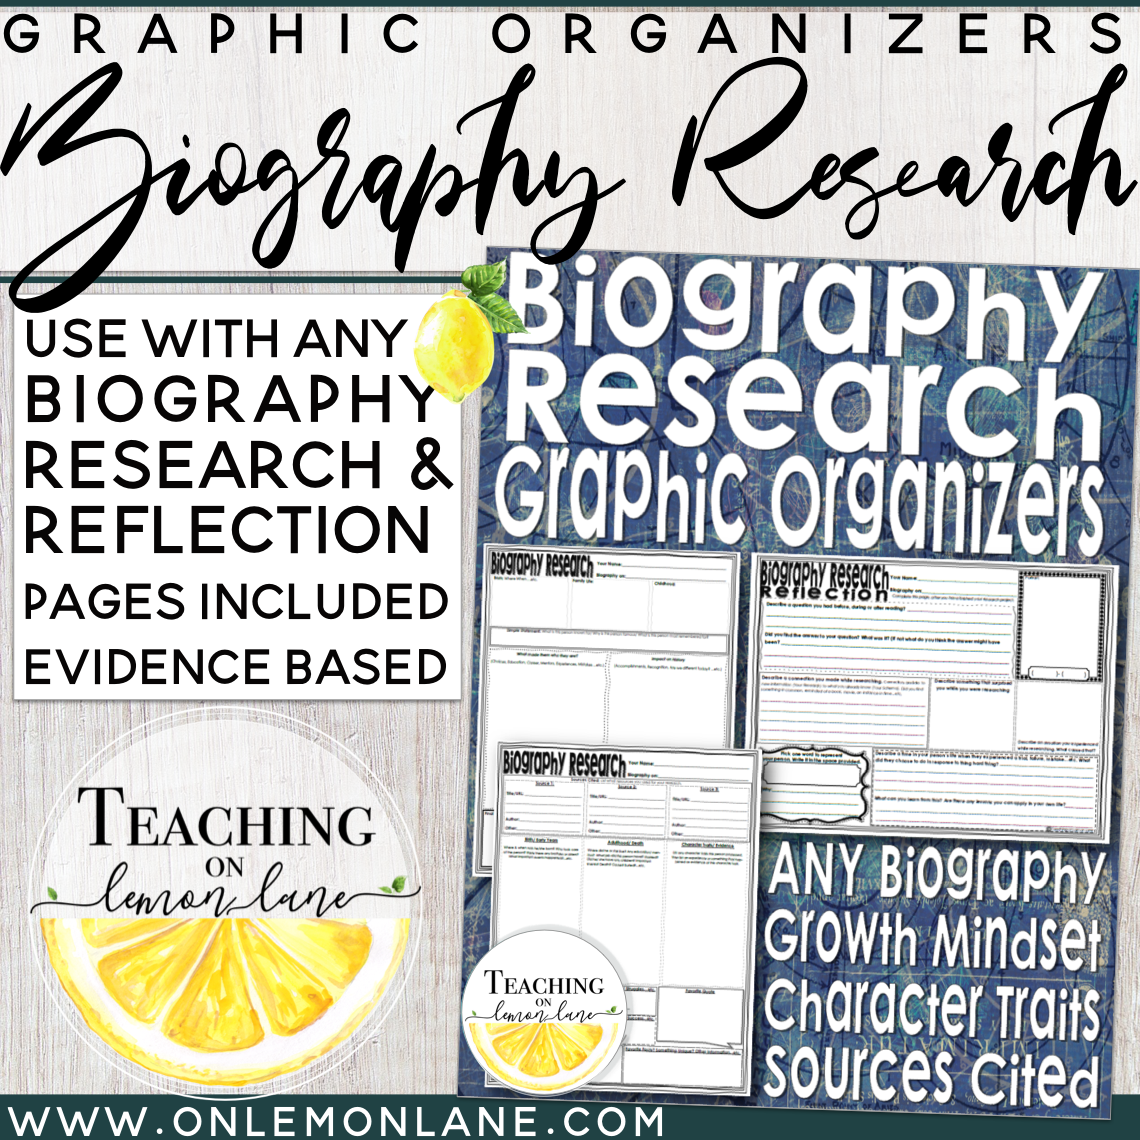 graphic organizer for biography research